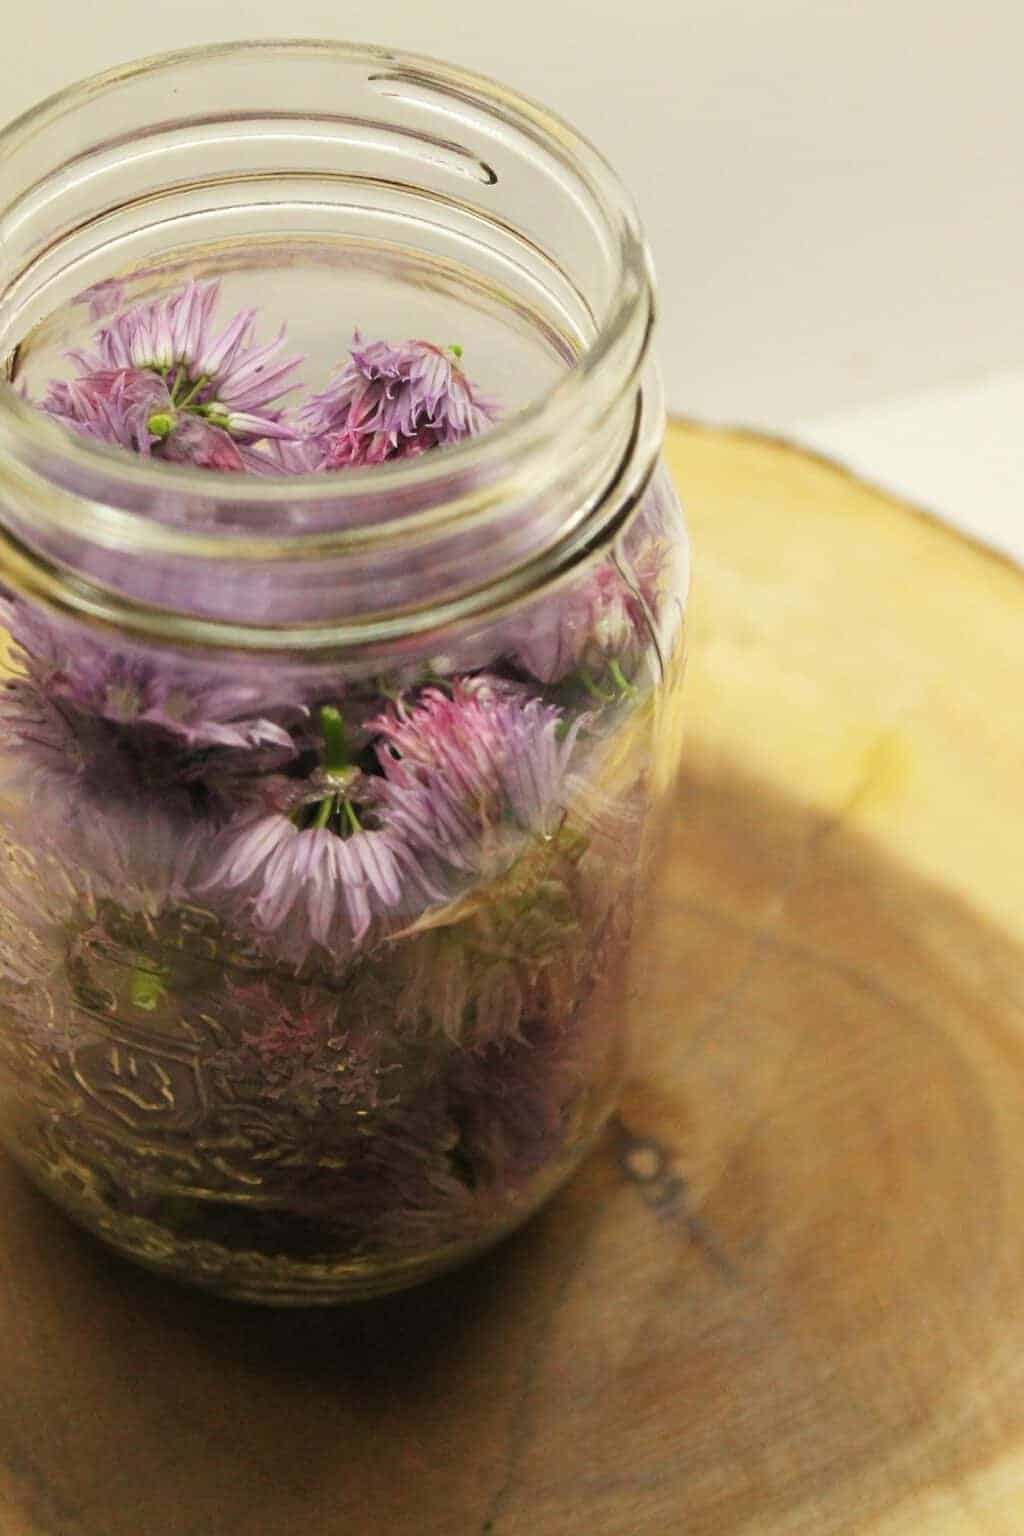 A mason jar packed with freshly picked chive flowers and white vinegar.